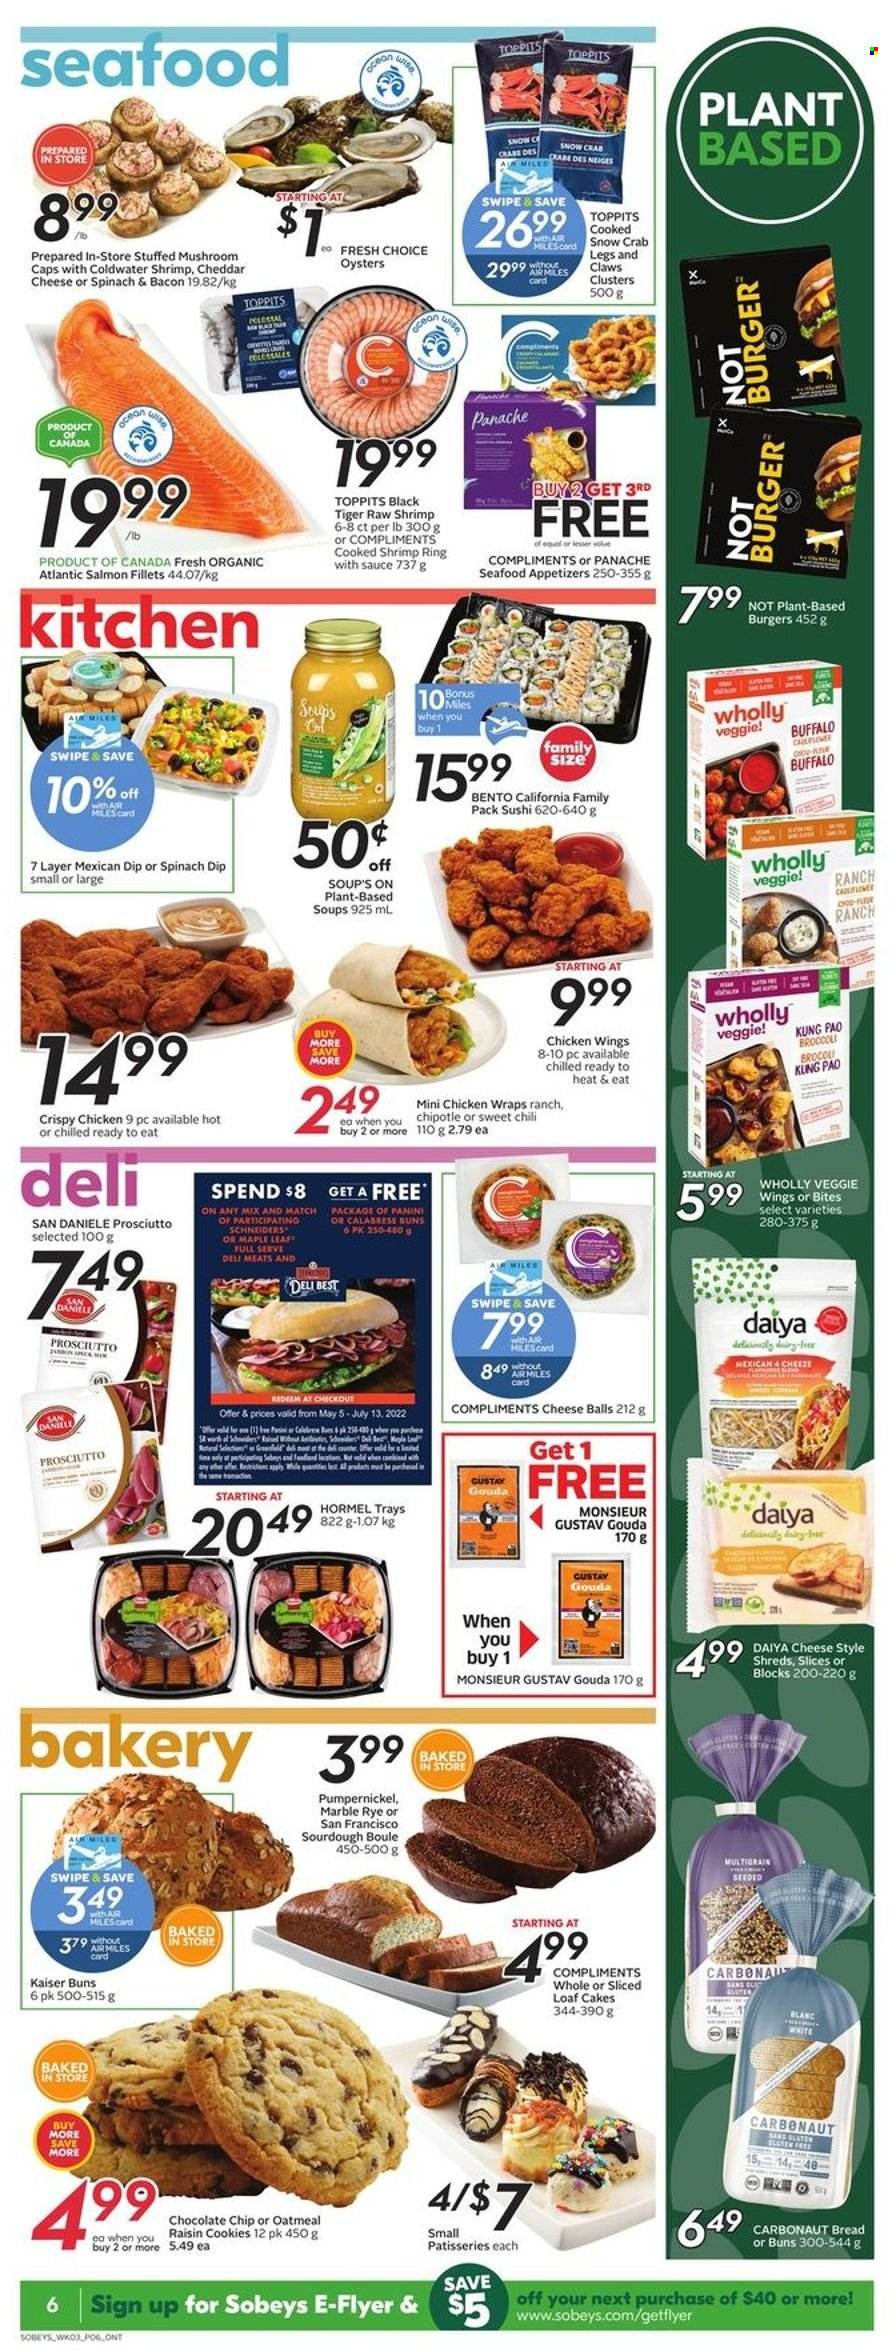 thumbnail - Sobeys Flyer - May 19, 2022 - May 25, 2022 - Sales products - mushrooms, bread, cake, panini, buns, wraps, kale, salmon, salmon fillet, oysters, seafood, crab legs, crab, shrimps, soup, hamburger, Hormel, bacon, prosciutto, gouda, cheddar, dip, spinach dip, chicken wings, cookies, oatmeal. Page 7.